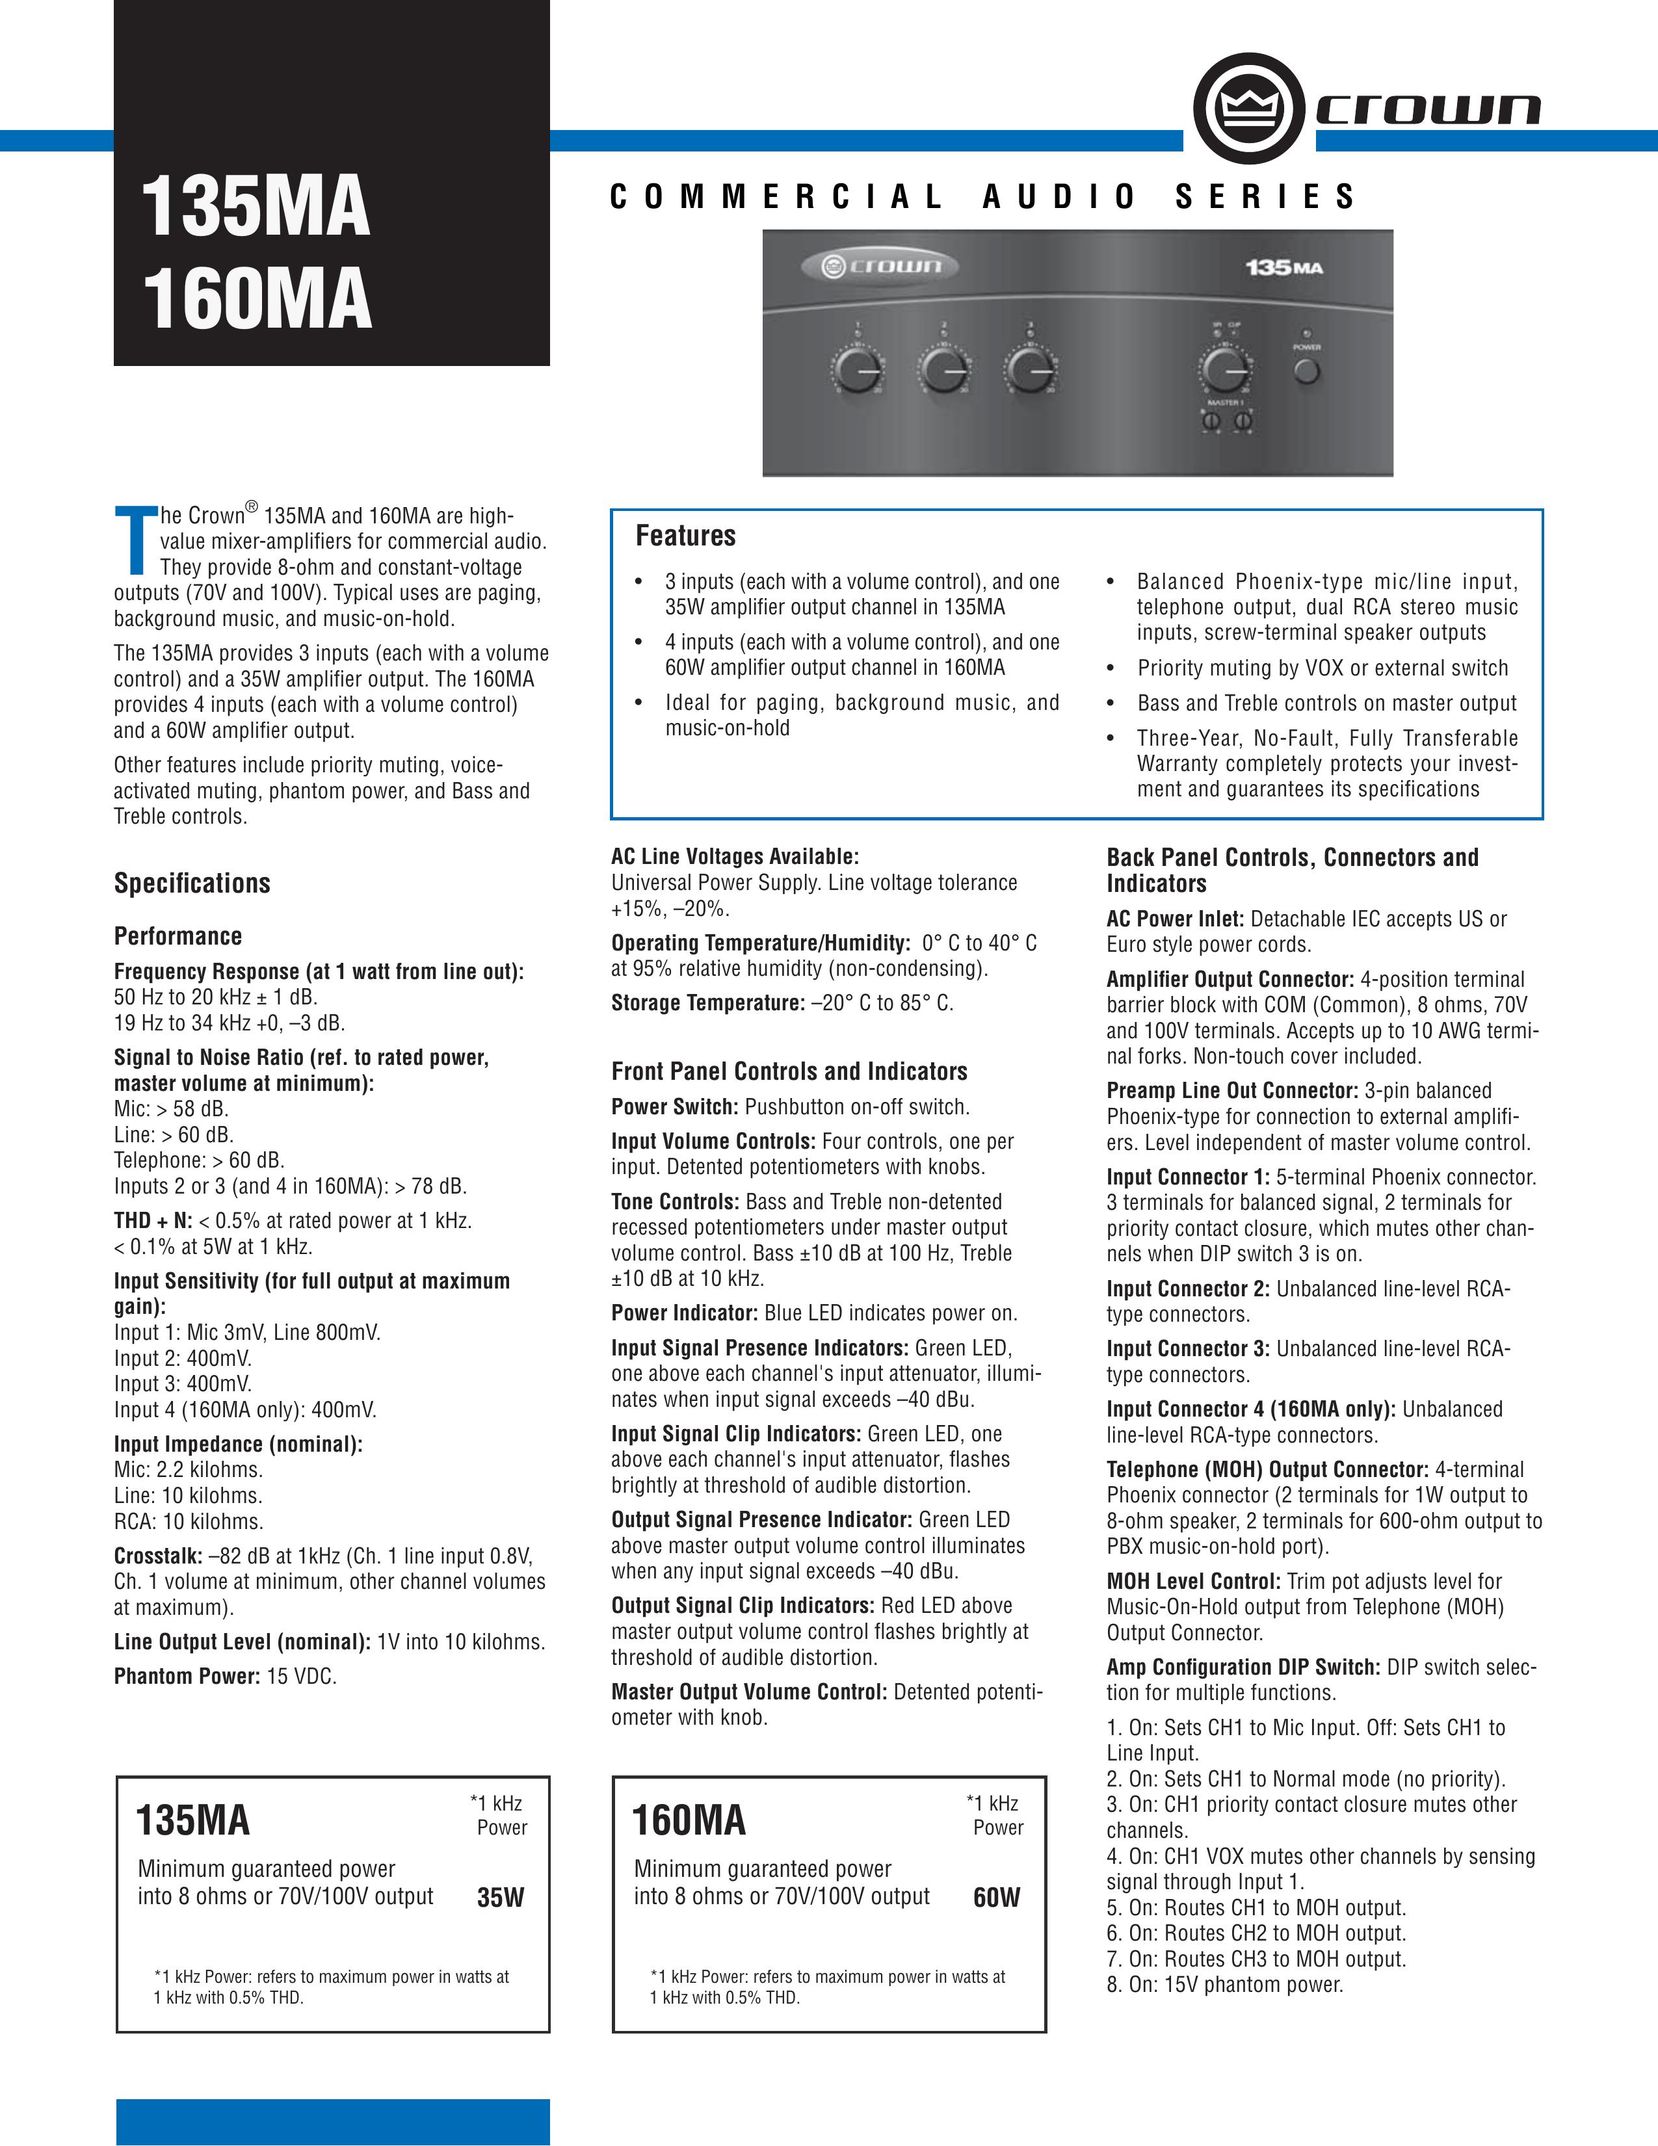 Crown Audio 135MA Stereo Amplifier User Manual